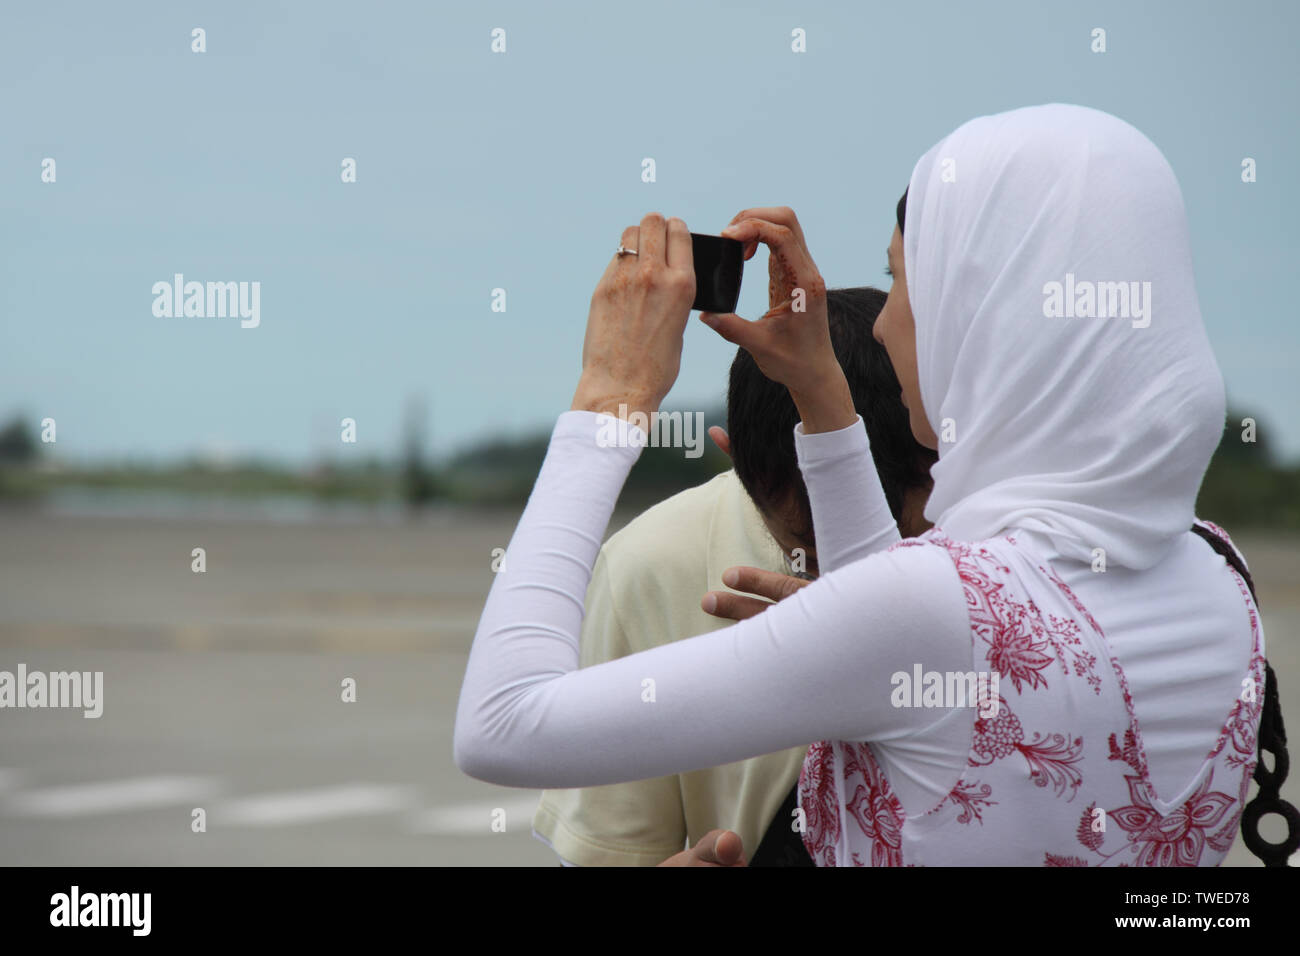 Woman taking picture with a digital camera, Malaysia Stock Photo